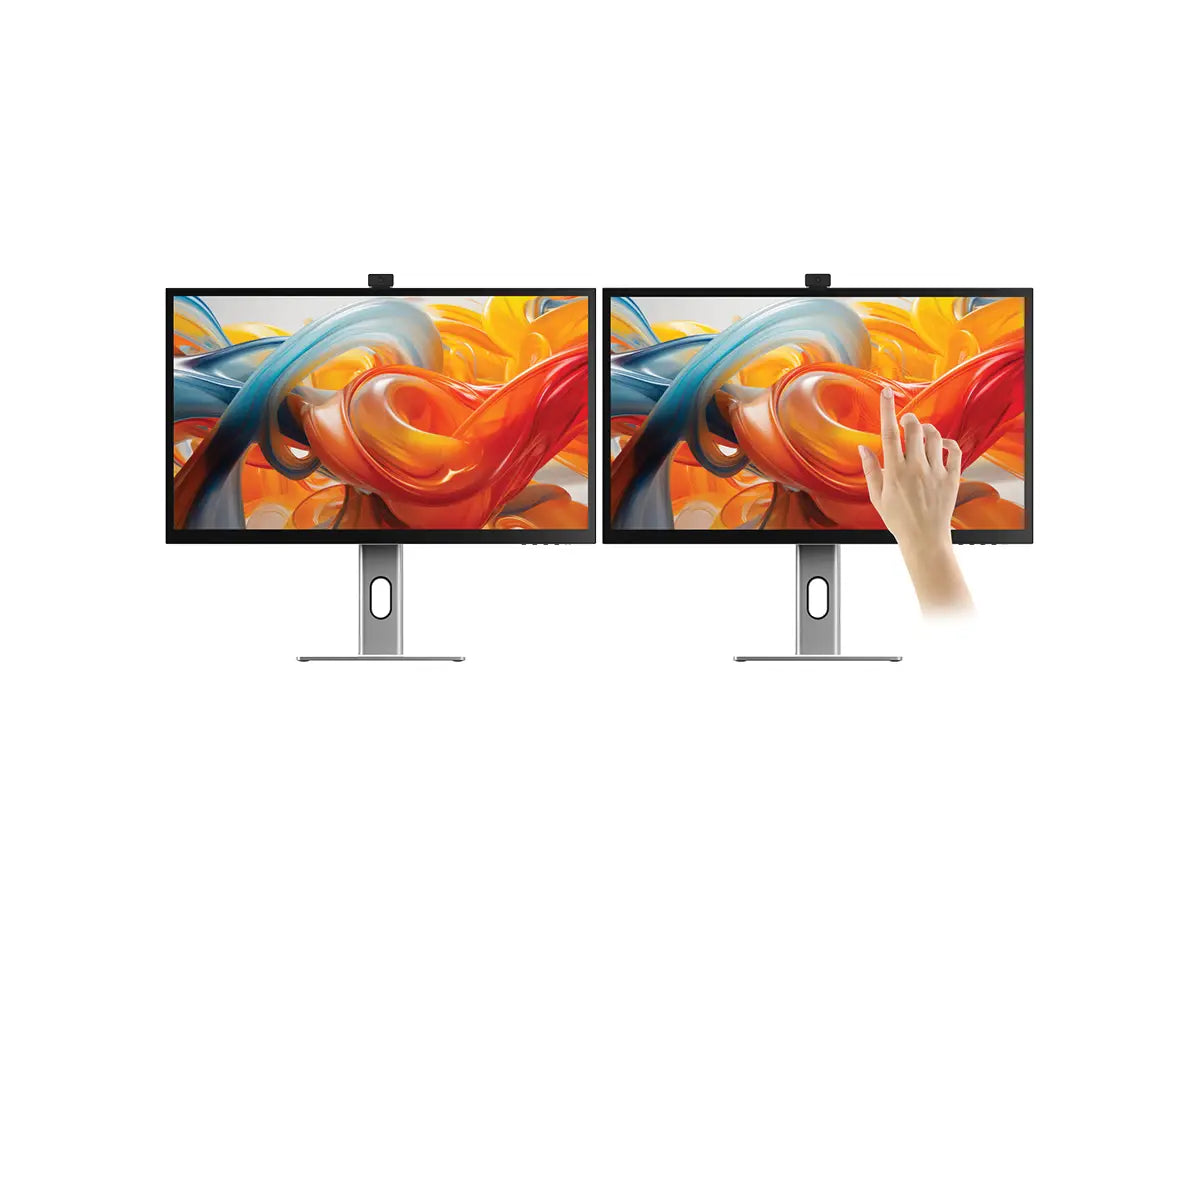 clarity-pro-touch-27-uhd-4k-monitor-with-65w-pd-webcam-and-touchscreen-pack-of-21